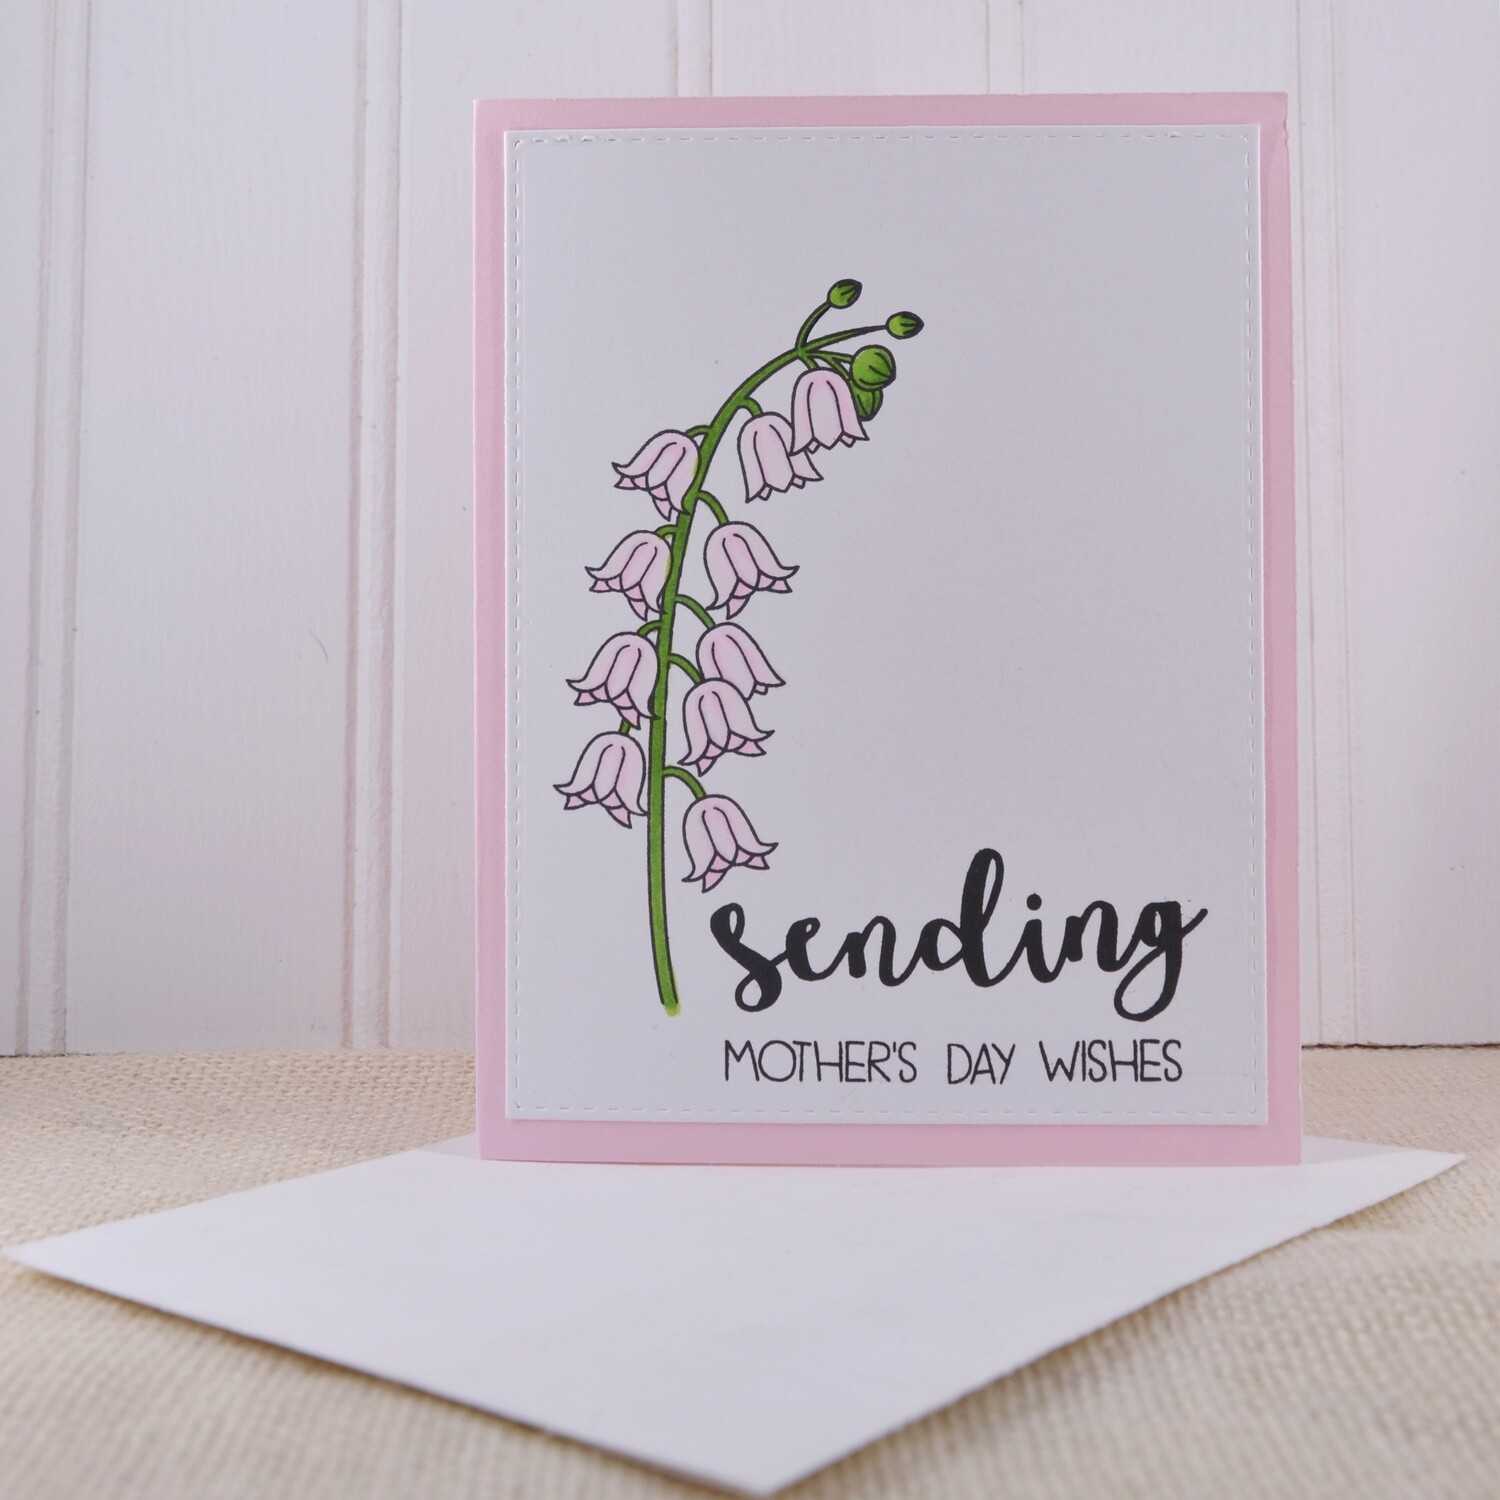 Sending Mother's Day Wishes - Pink Bell Flowers